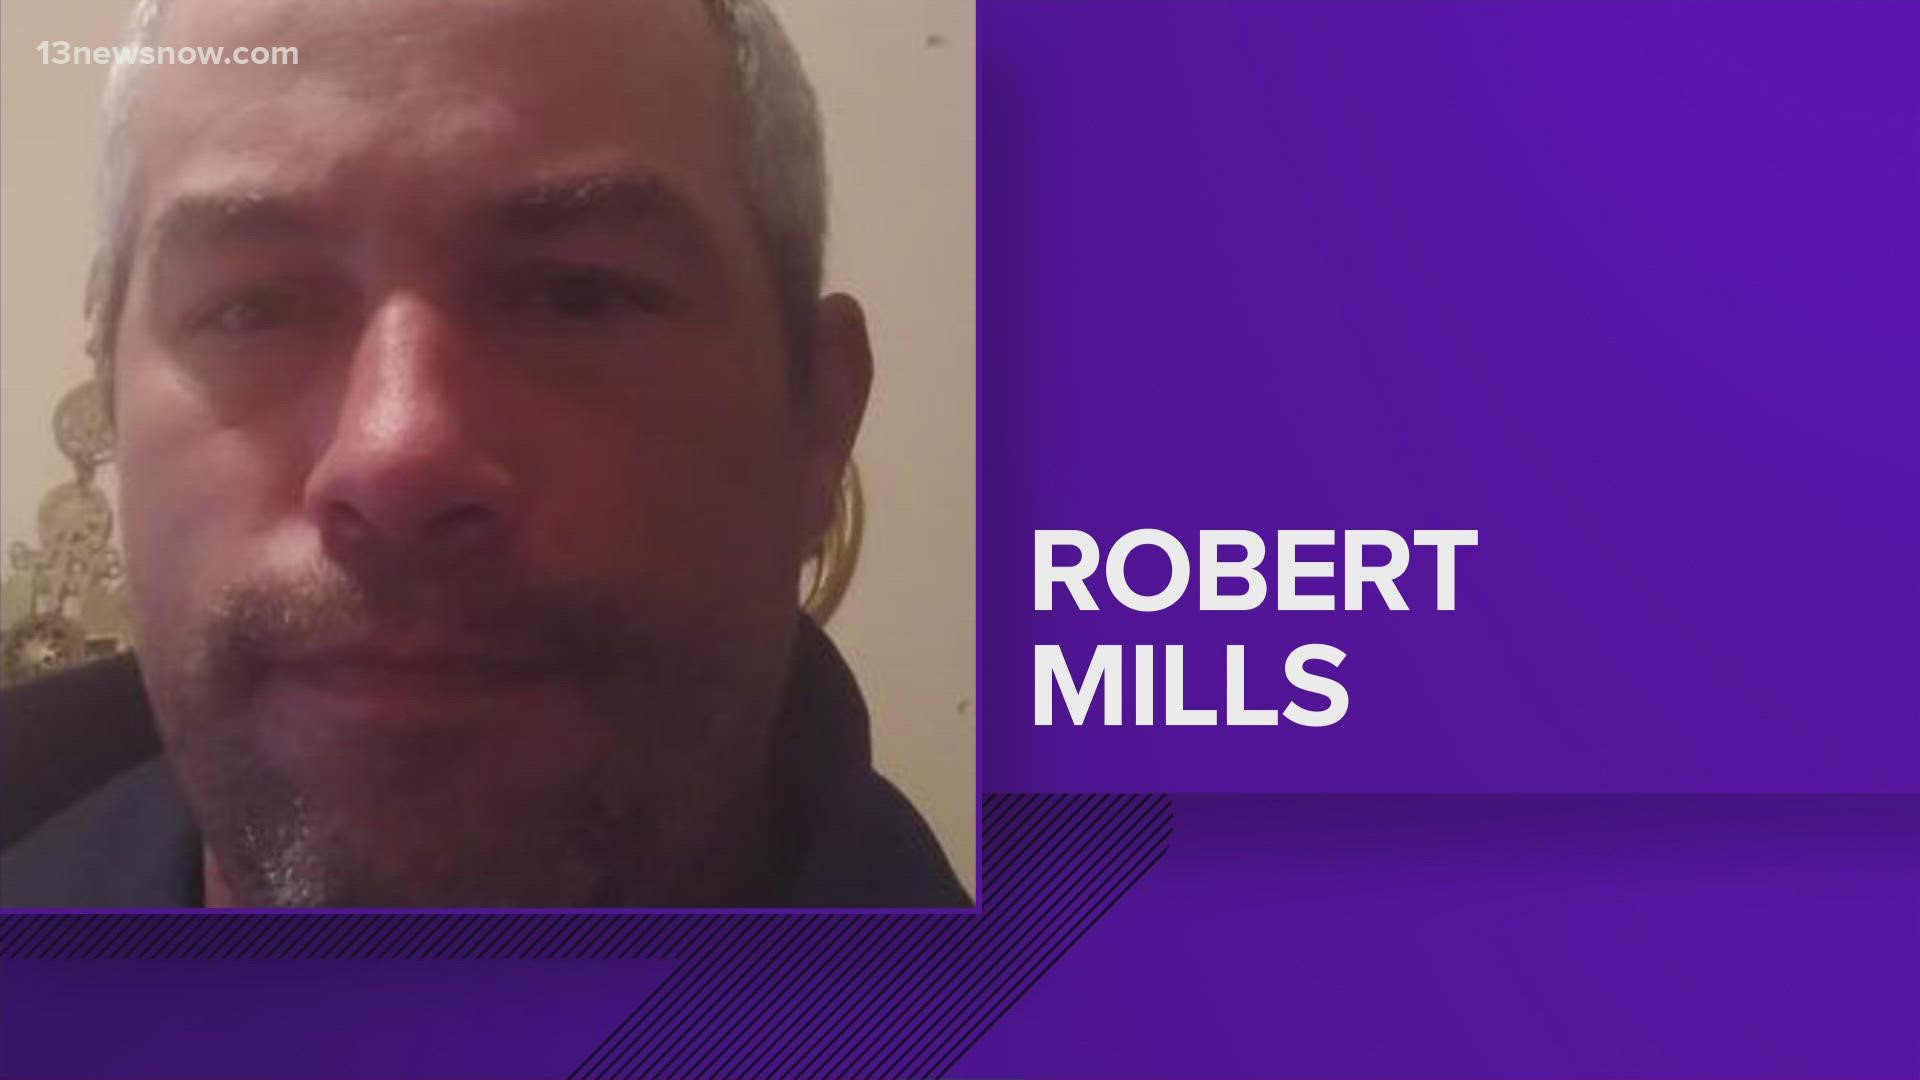 The last time anyone saw Robert Mills was on April 3. That morning, he was walking down Forest Park Road in Elizabeth City.